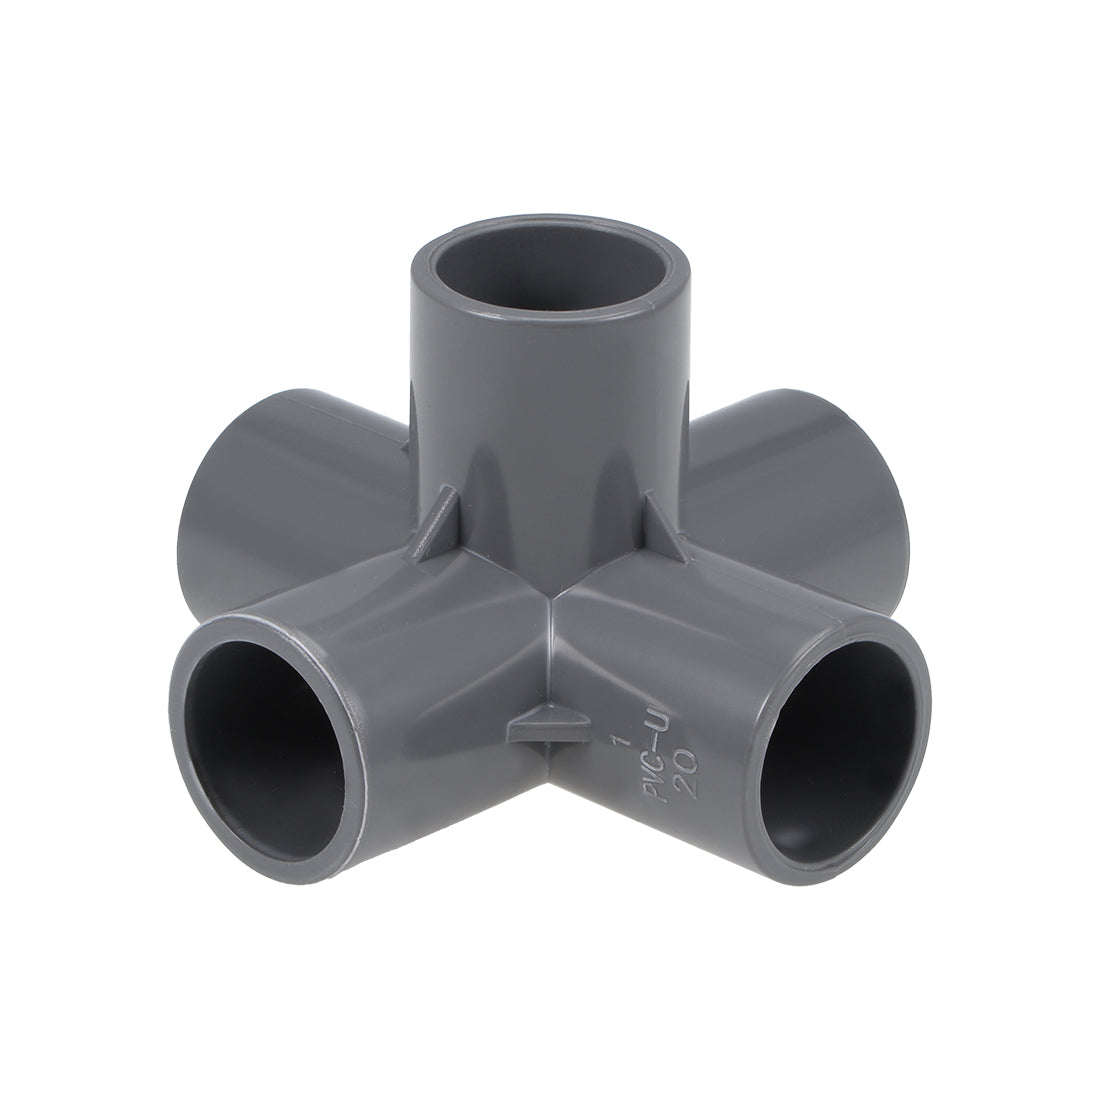 uxcell Uxcell 5 Way 20mm Tee Metric PVC Fitting Elbow - PVC Furniture Elbow Fittings Gray 2Pcs